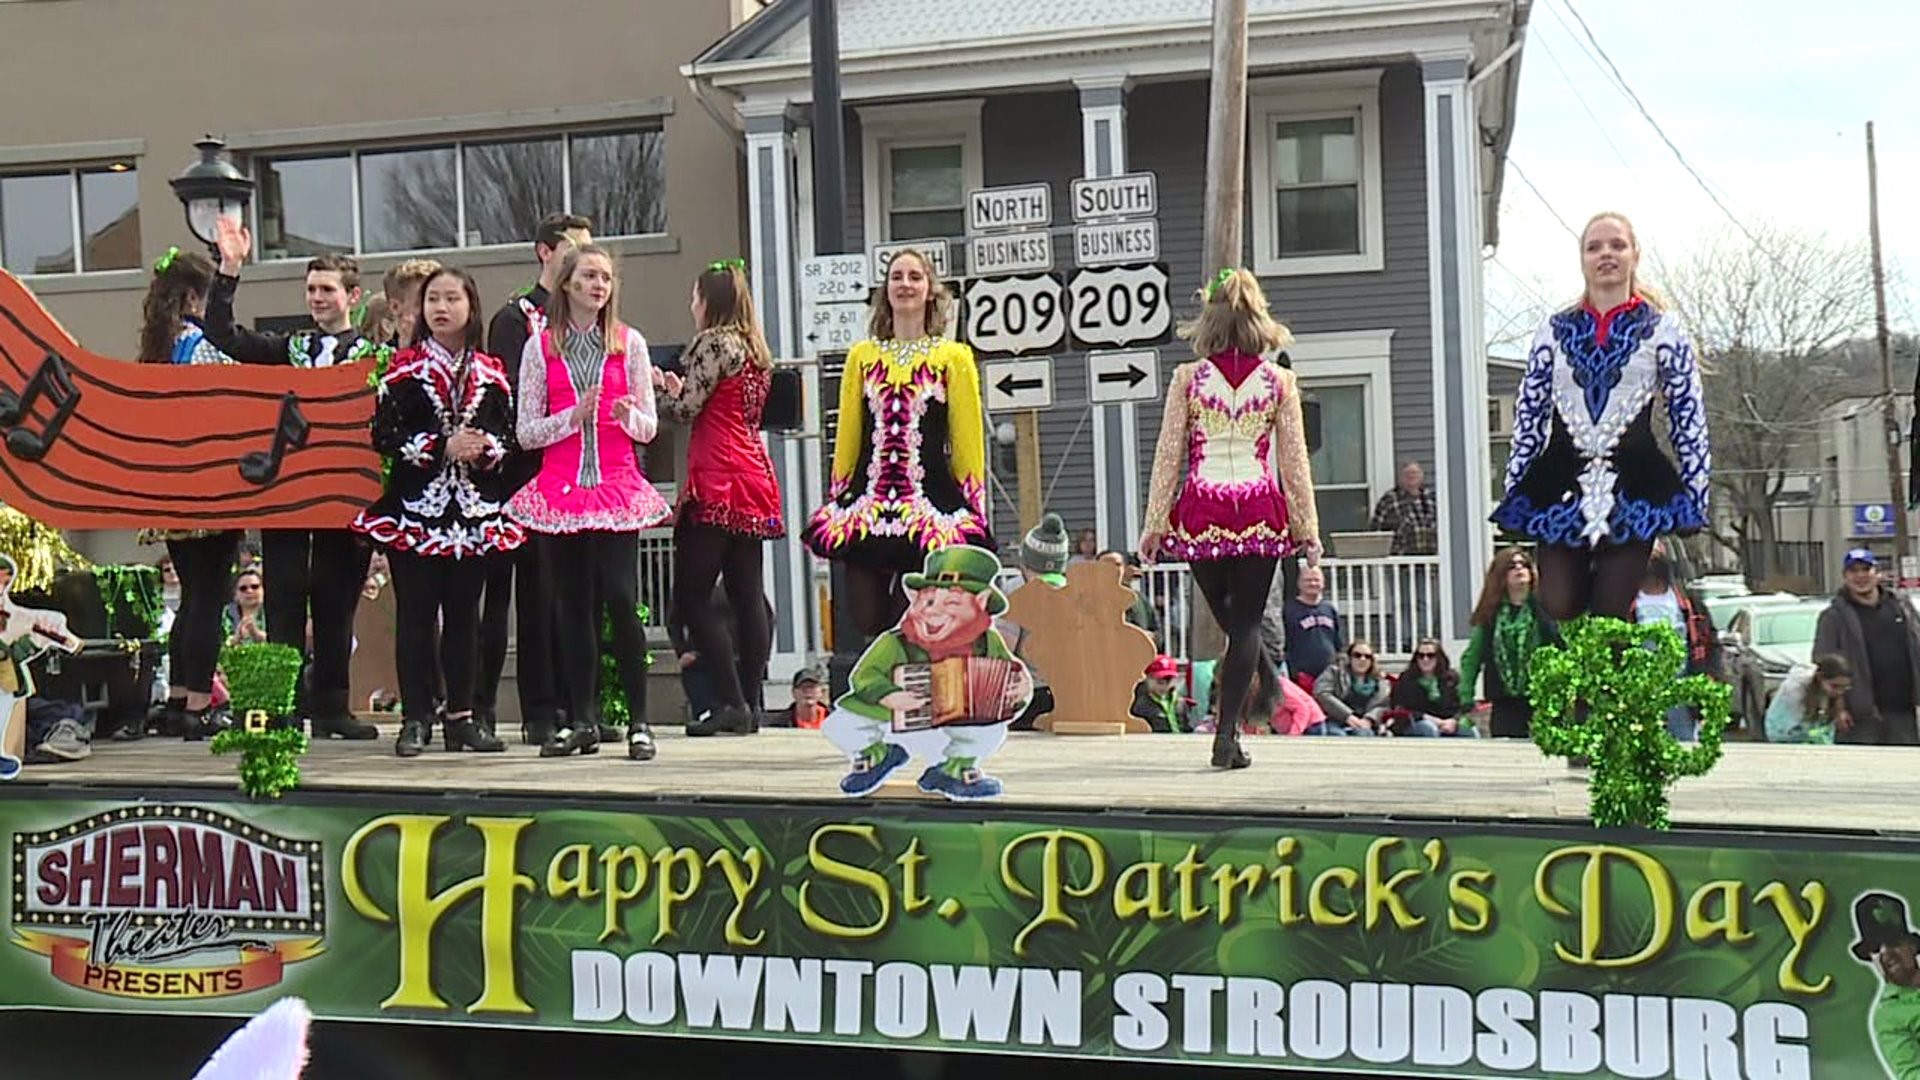 St. Patrick's Day Celebrations Continue with Stroudsburg Parade